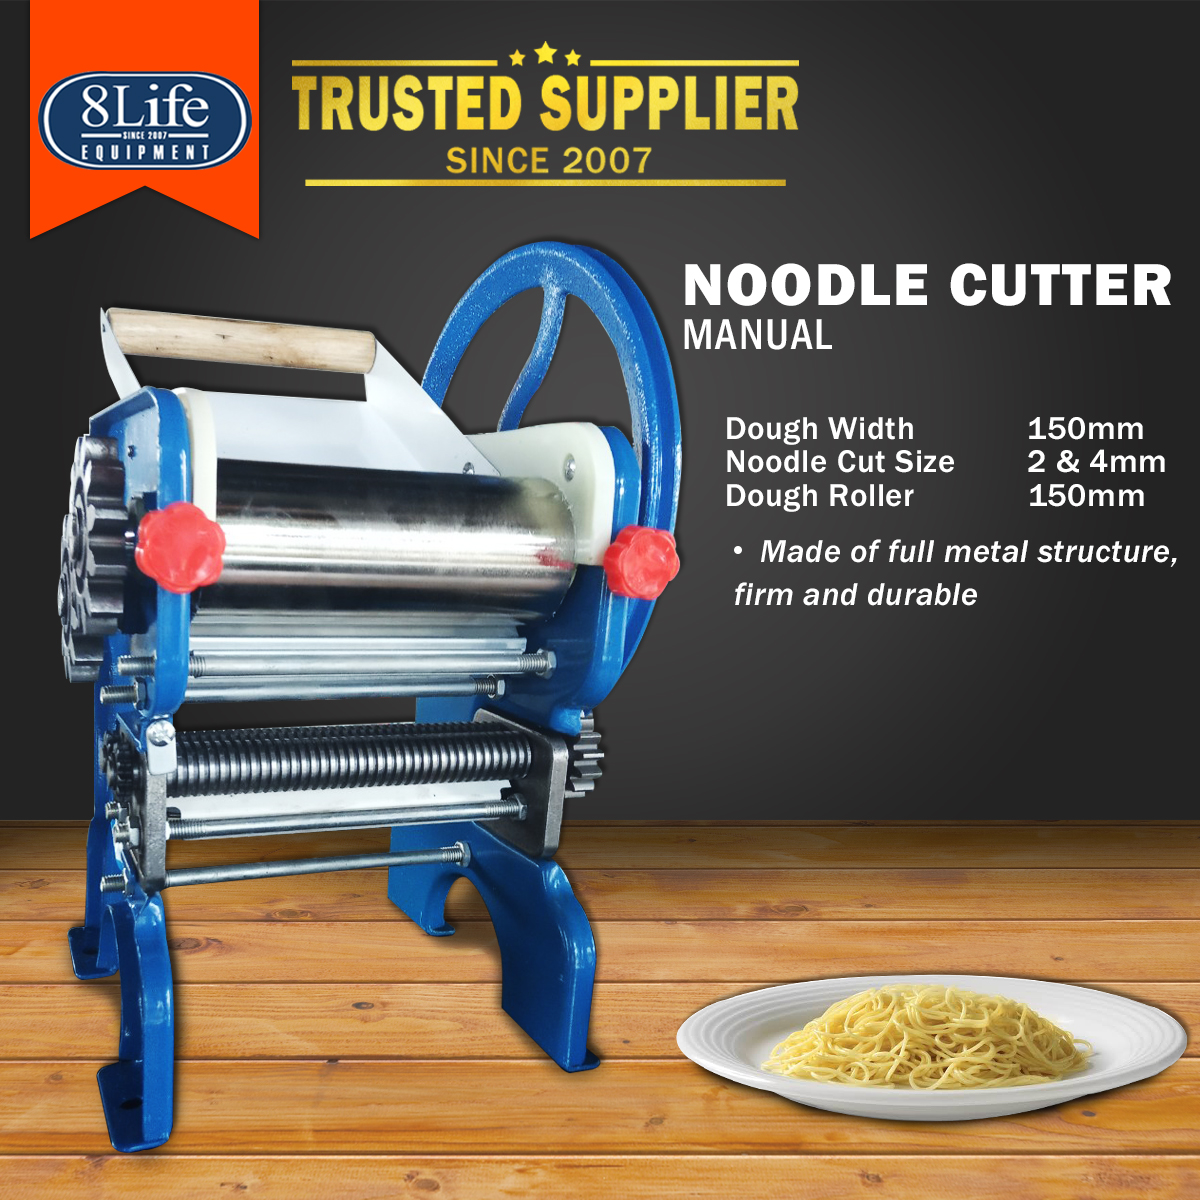 2pc Stainless Steel Manual Noodle Cutter Wheel Manual Noodle Maker